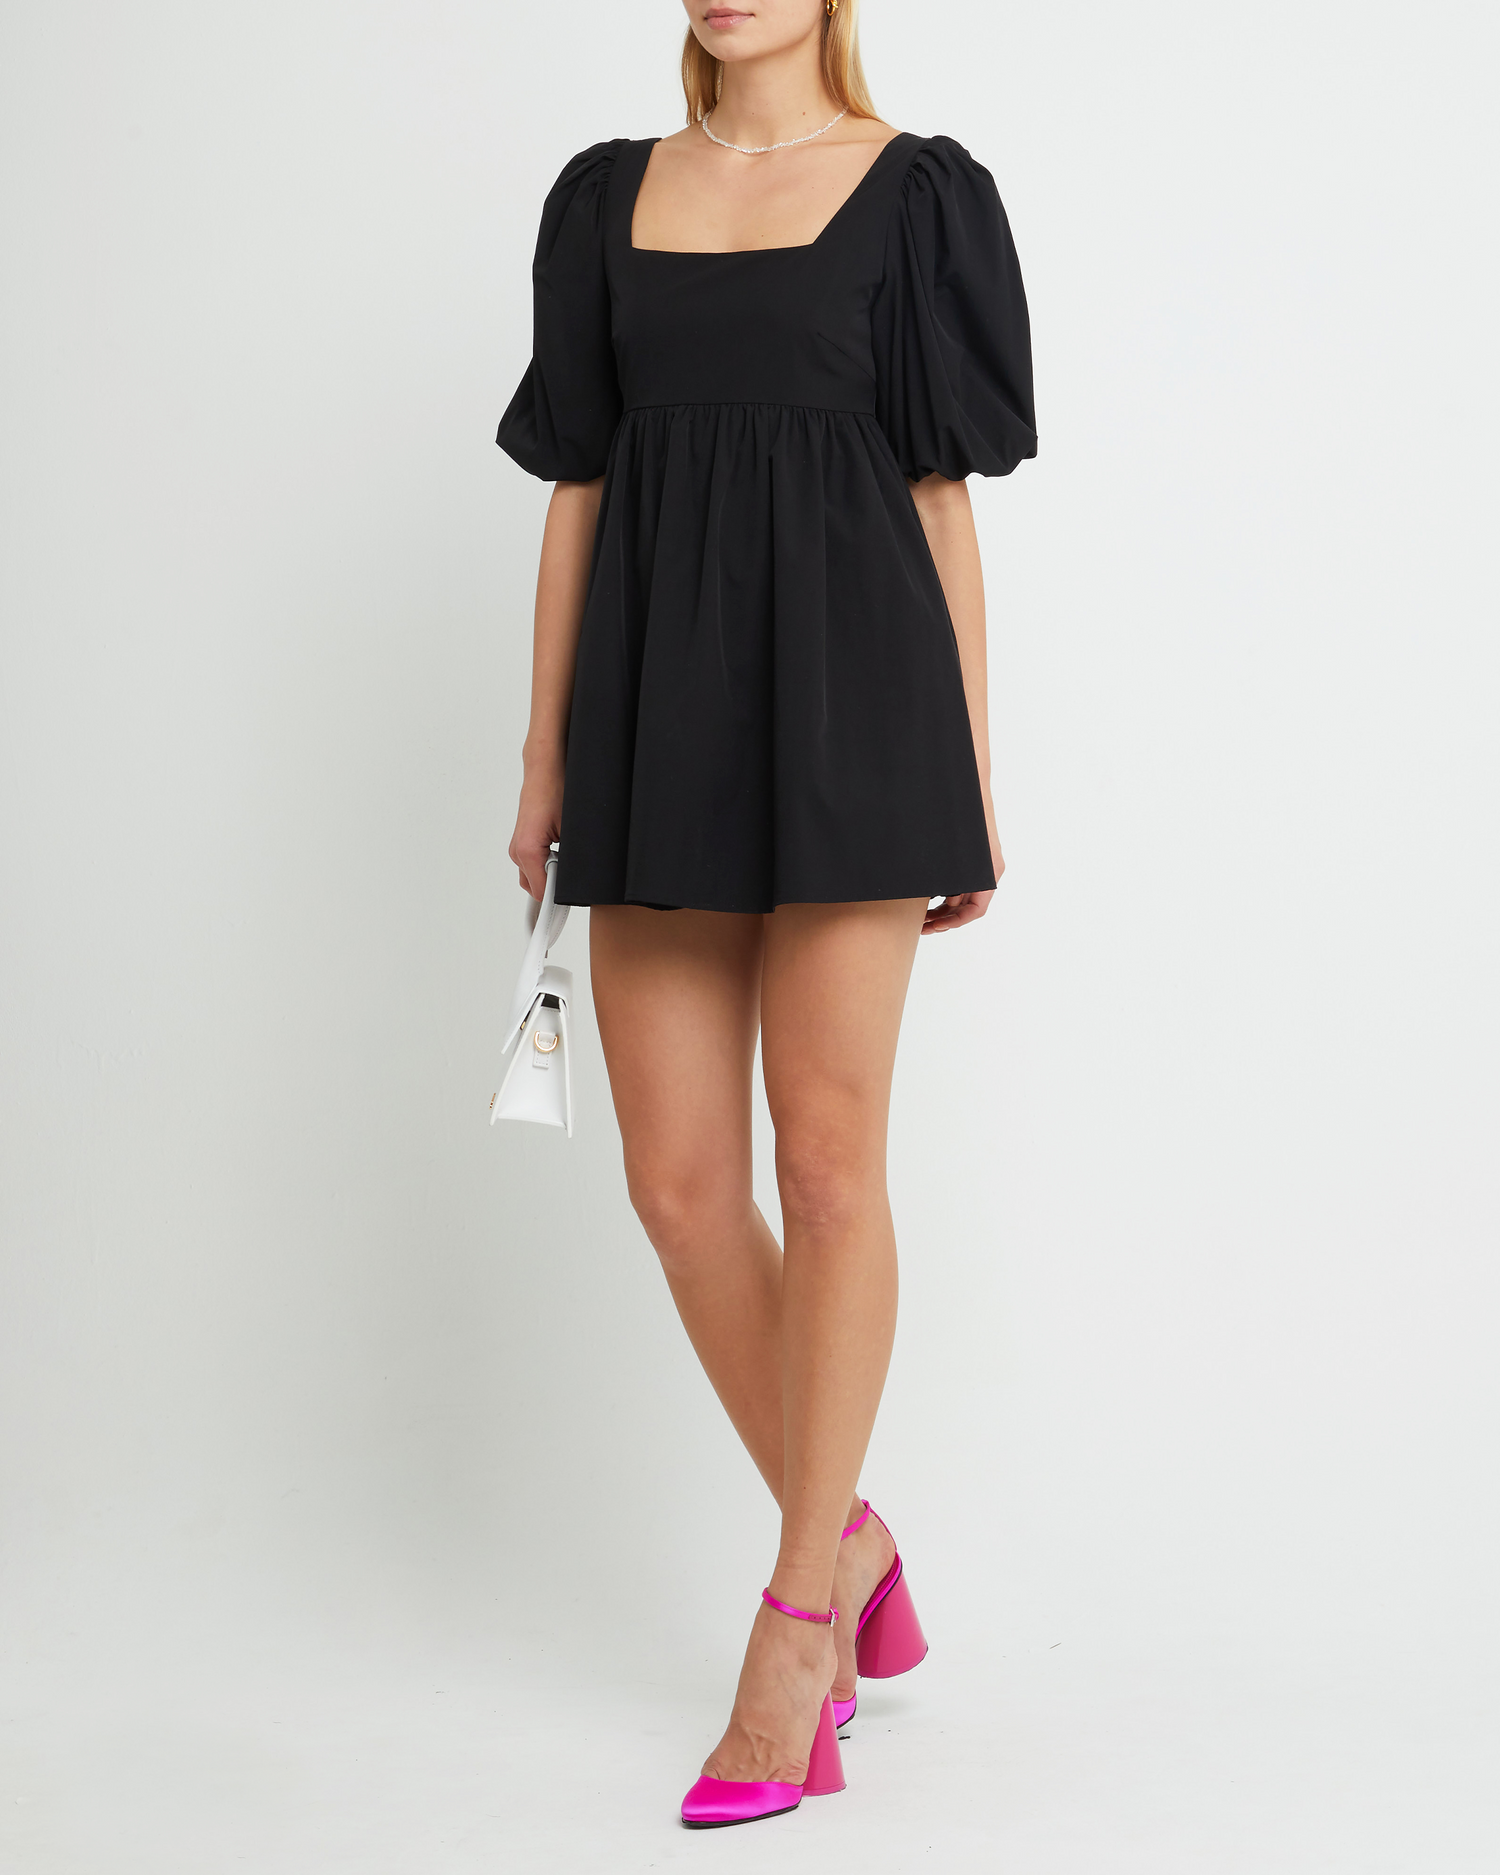 Fourth image of Adley Dress, a black mini dress, open back, back tie, babydoll, puff sleeves, ribbon, bows